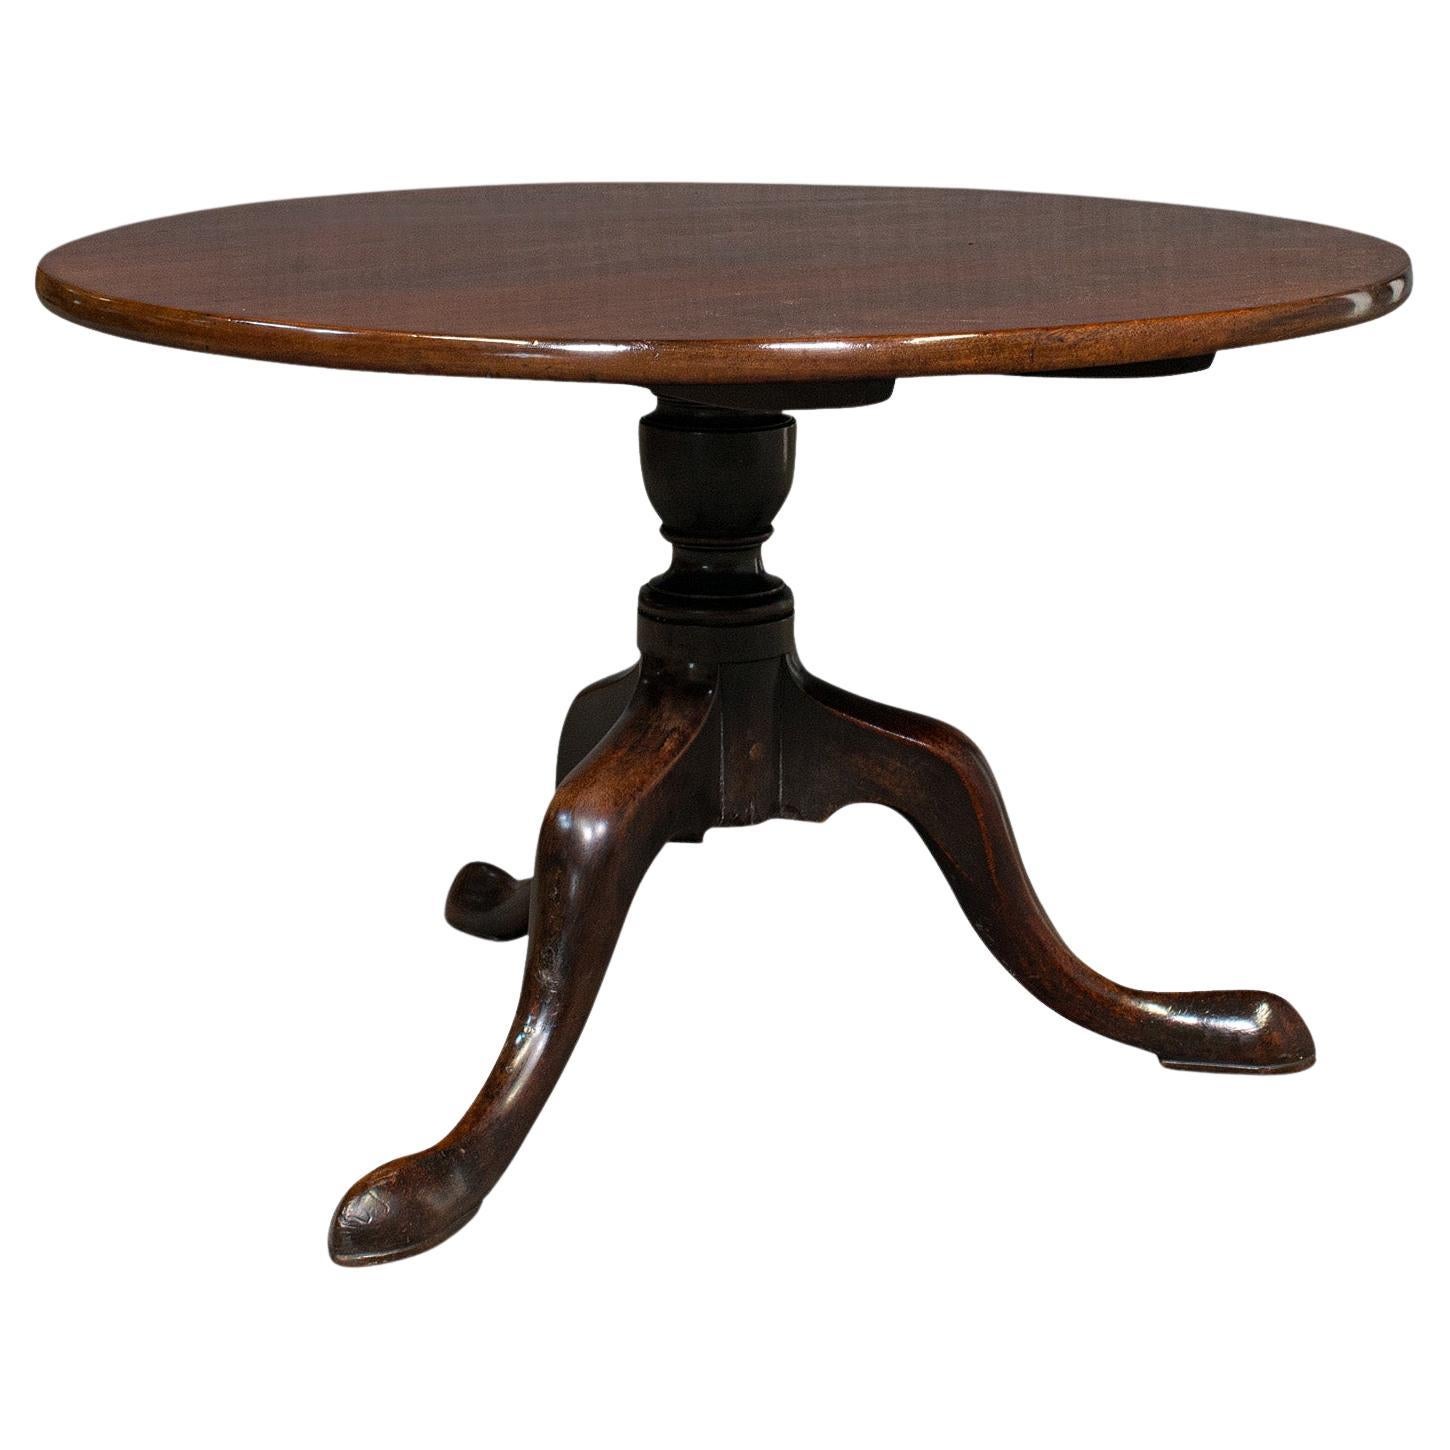 Antique Tilt Top Table, English, Wine, Afternoon Tea, Early Georgian, Circa 1750 For Sale